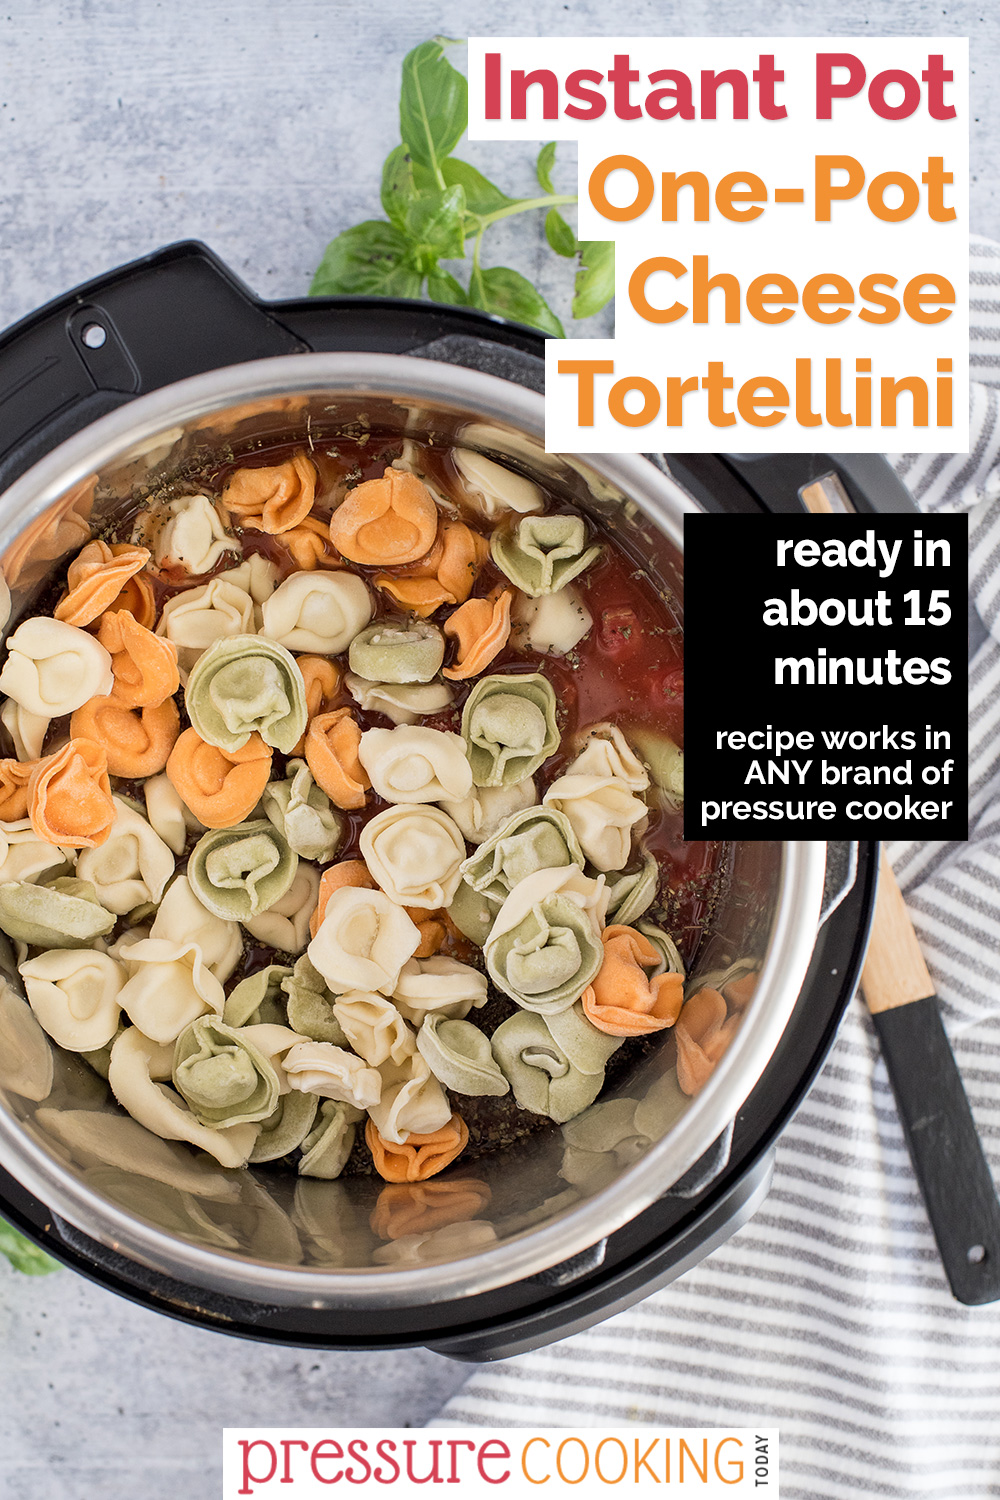 This Instant Pot Tortellini is a one-pot recipe that cooks pasta and sauce at the same time in the same pot. It goes from frozen to finished in about 15 minutes. Plus it starts from frozen pasta, so it's great on busy nights! via @PressureCook2da